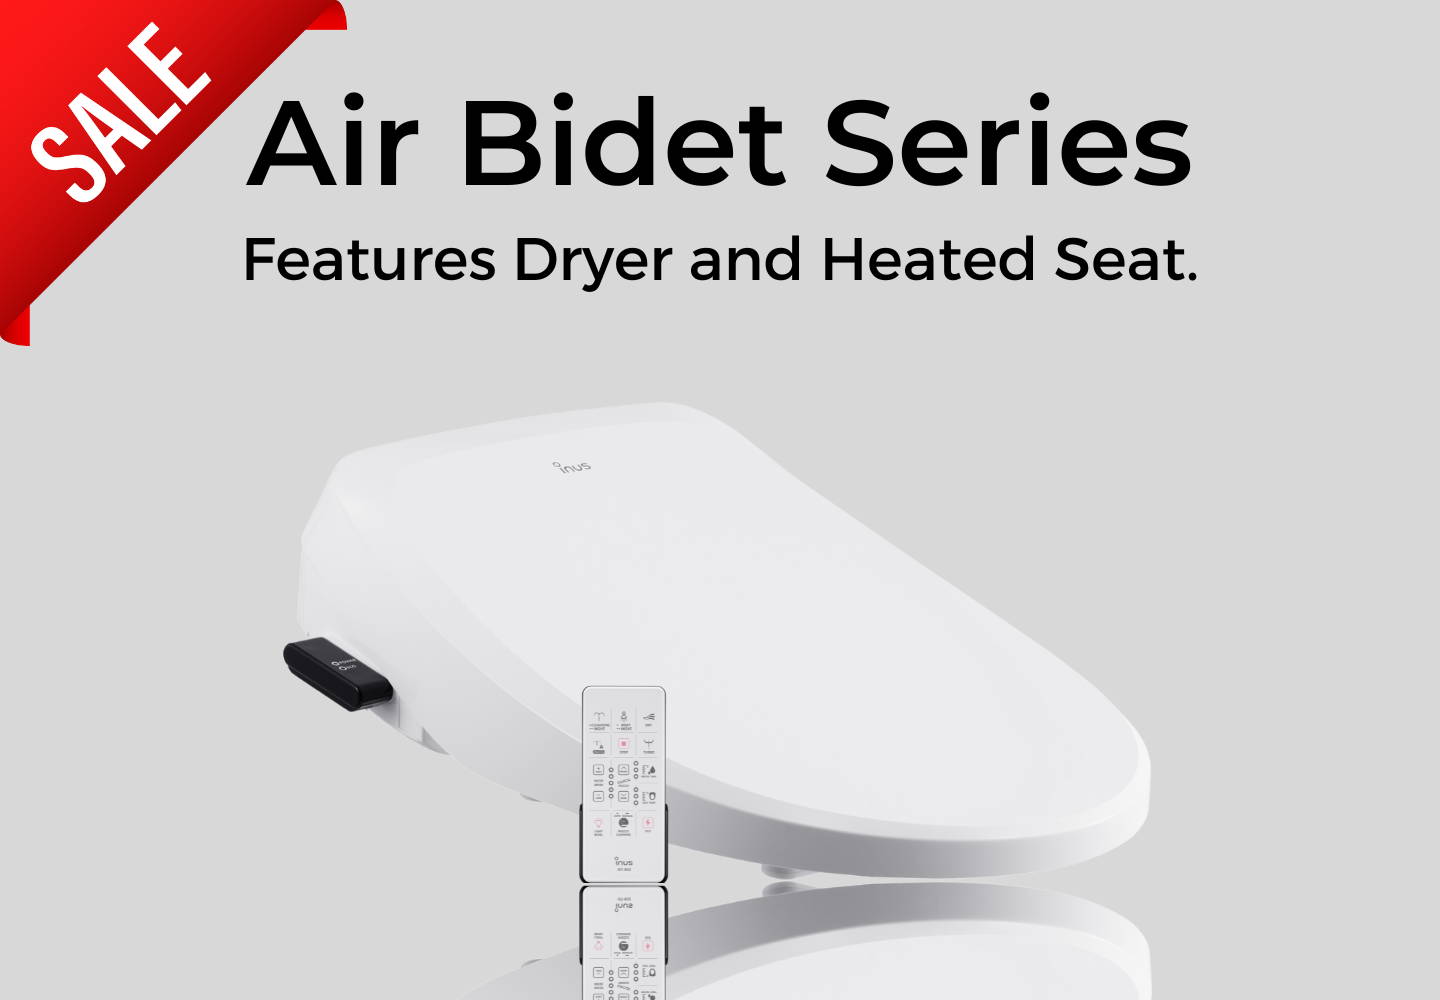 bidet with dryer, bidet with heated seat, self-cleansing nozzle, bide with remote